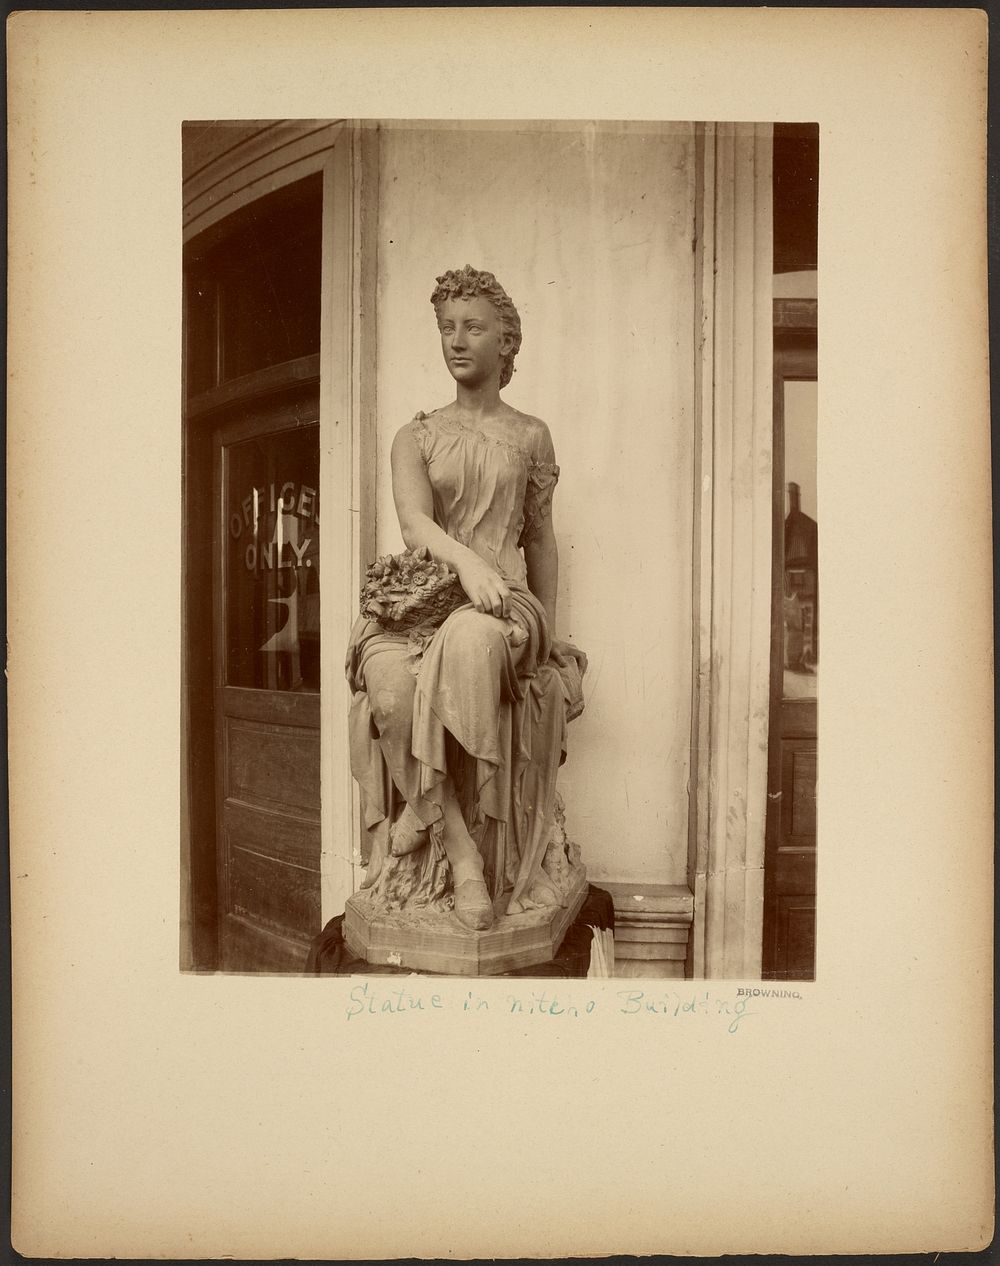 Statue in niche of Building by Browning